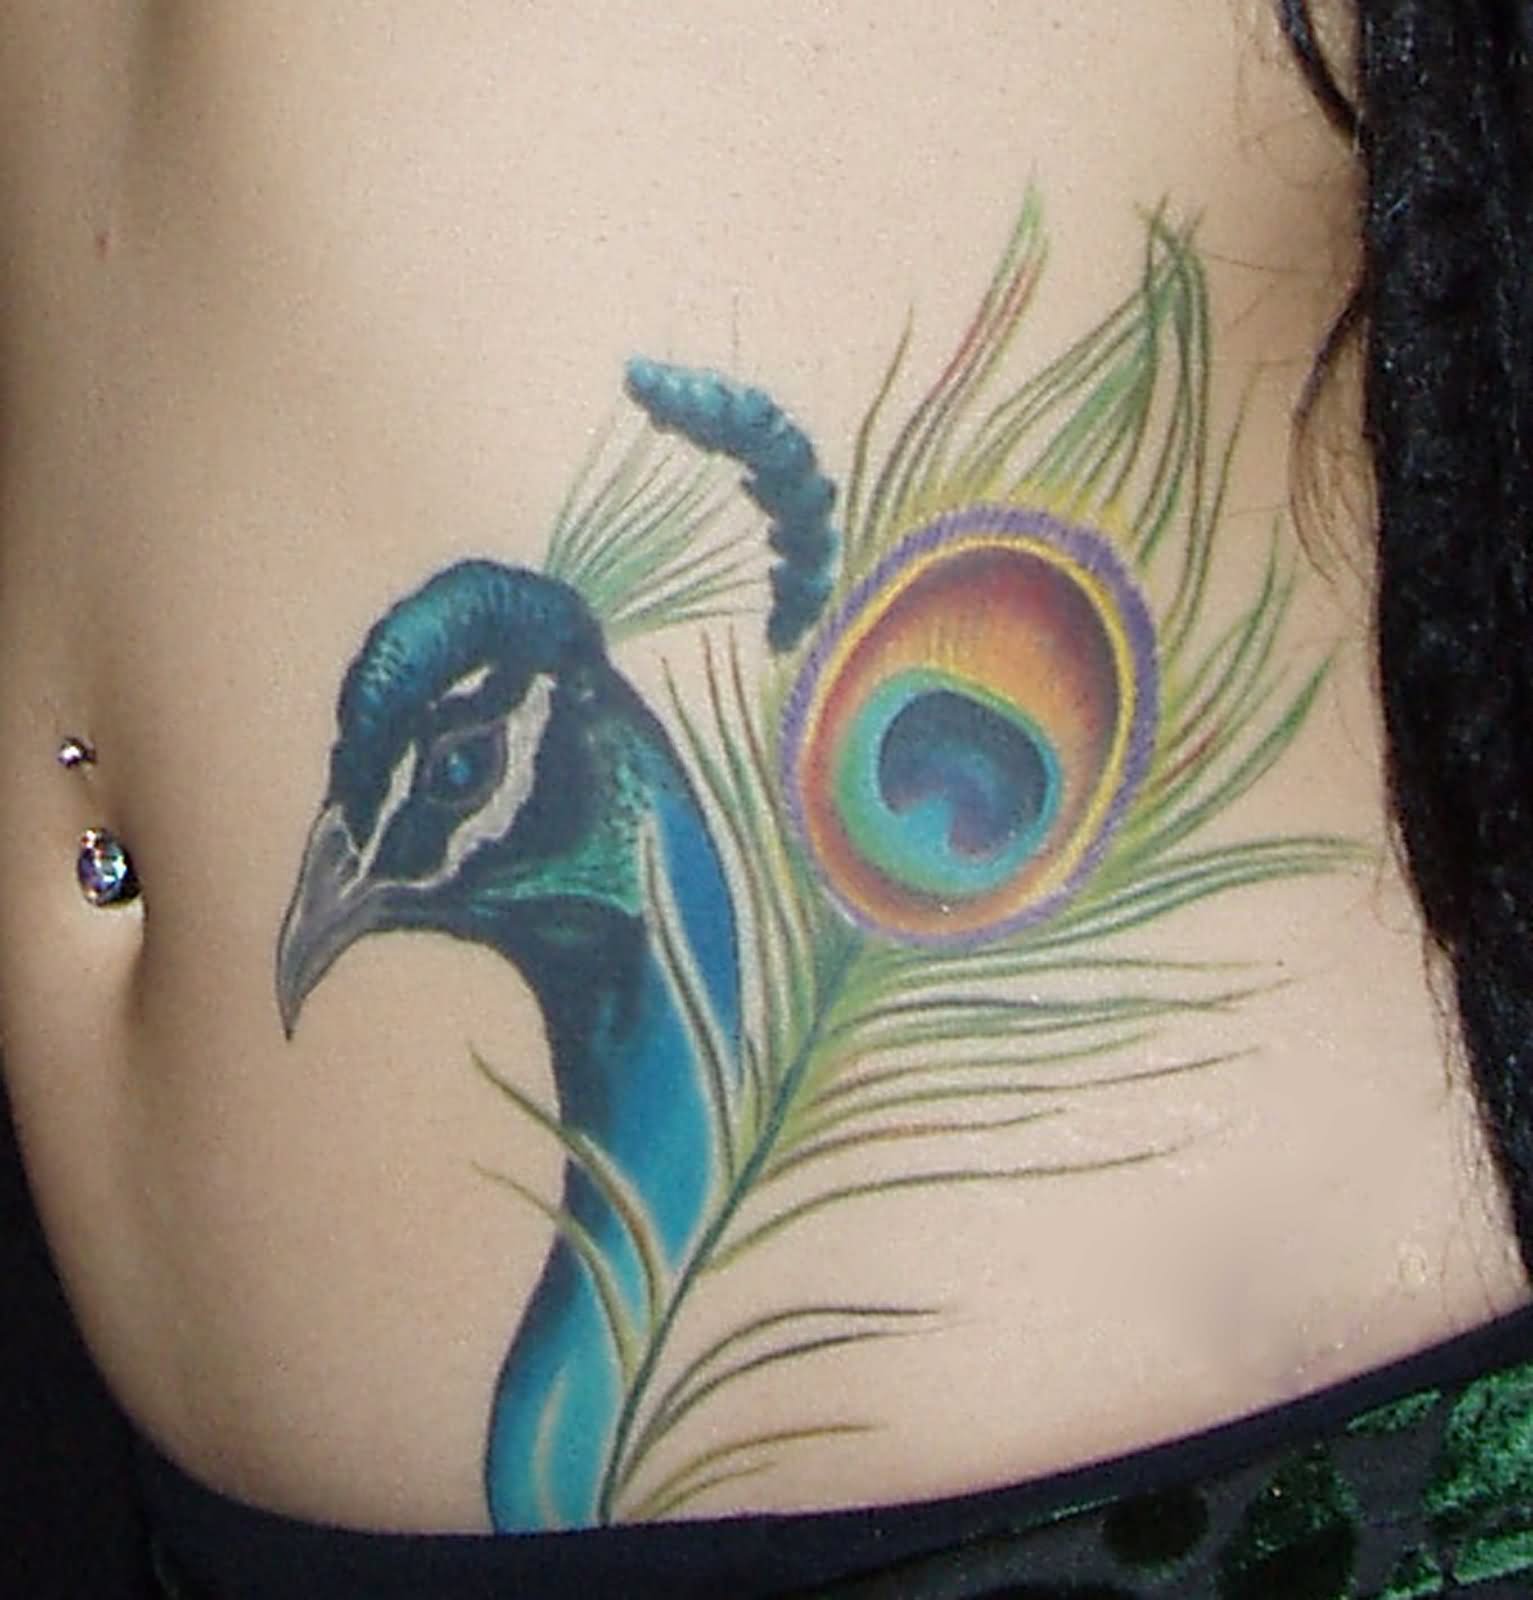 Sexy peacock lower stomach tattoo.